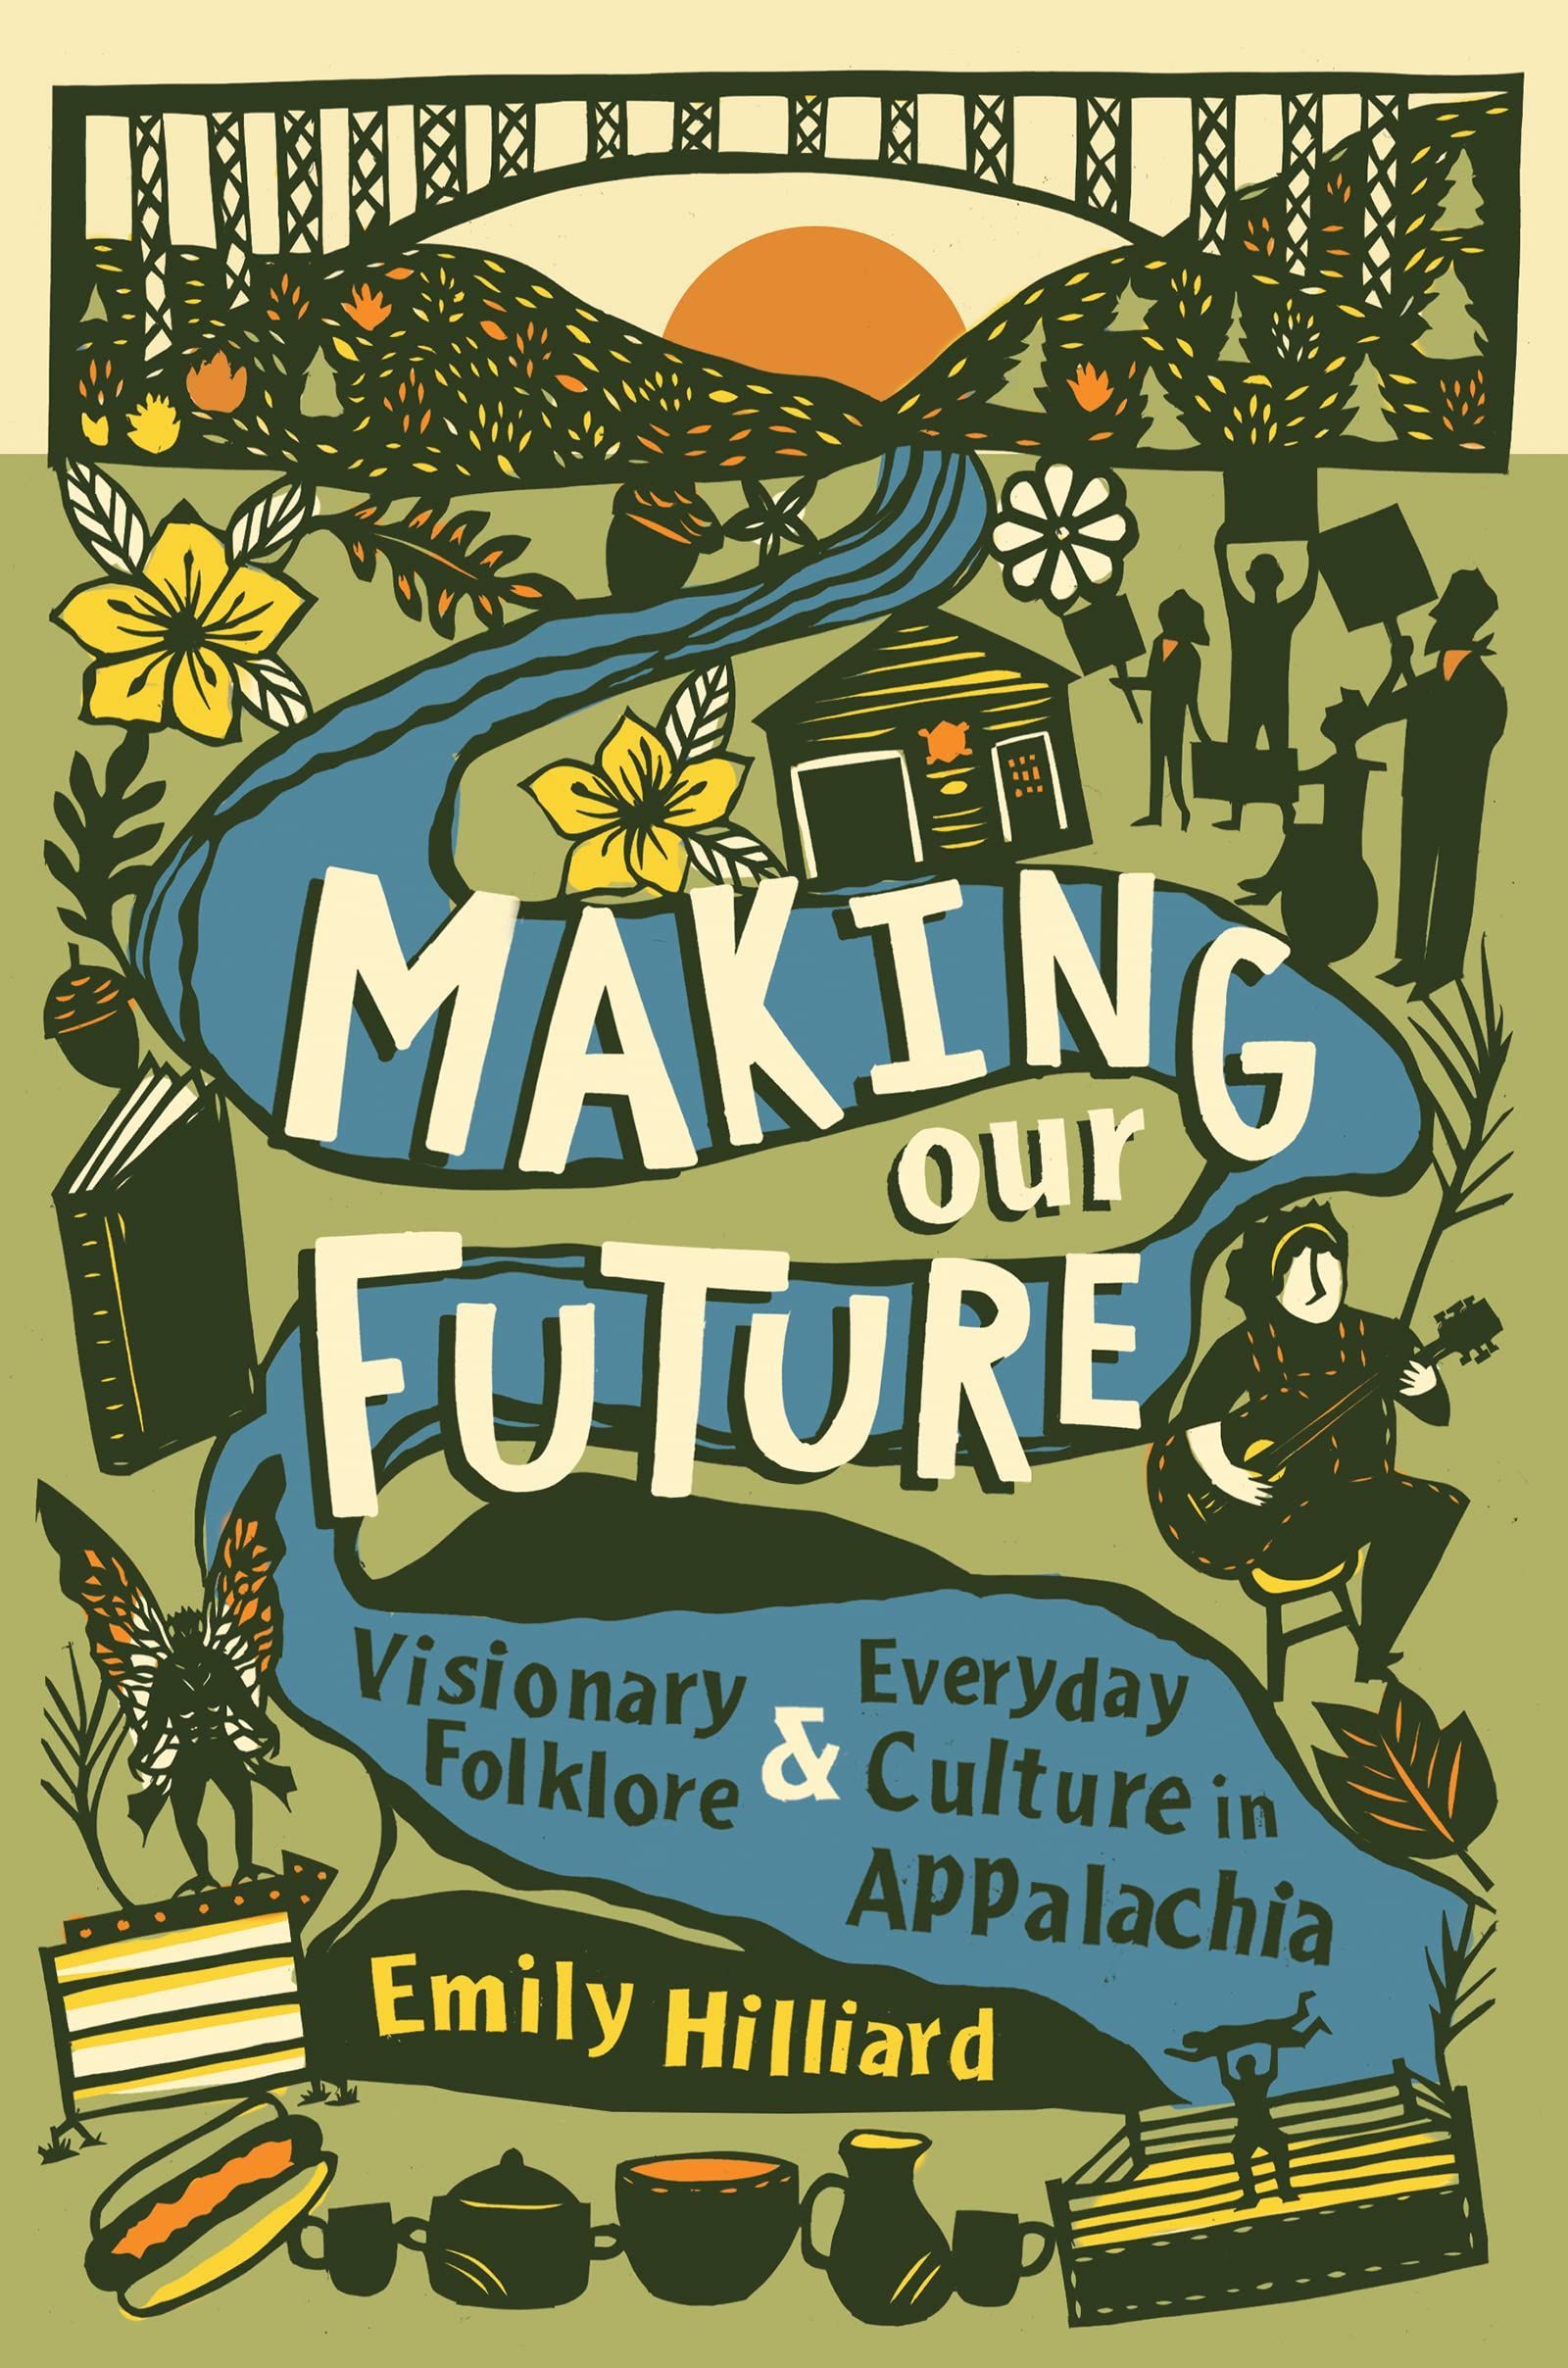 Play Me Some Mountain Music: On Emily Hilliard’s “Making Our Future”